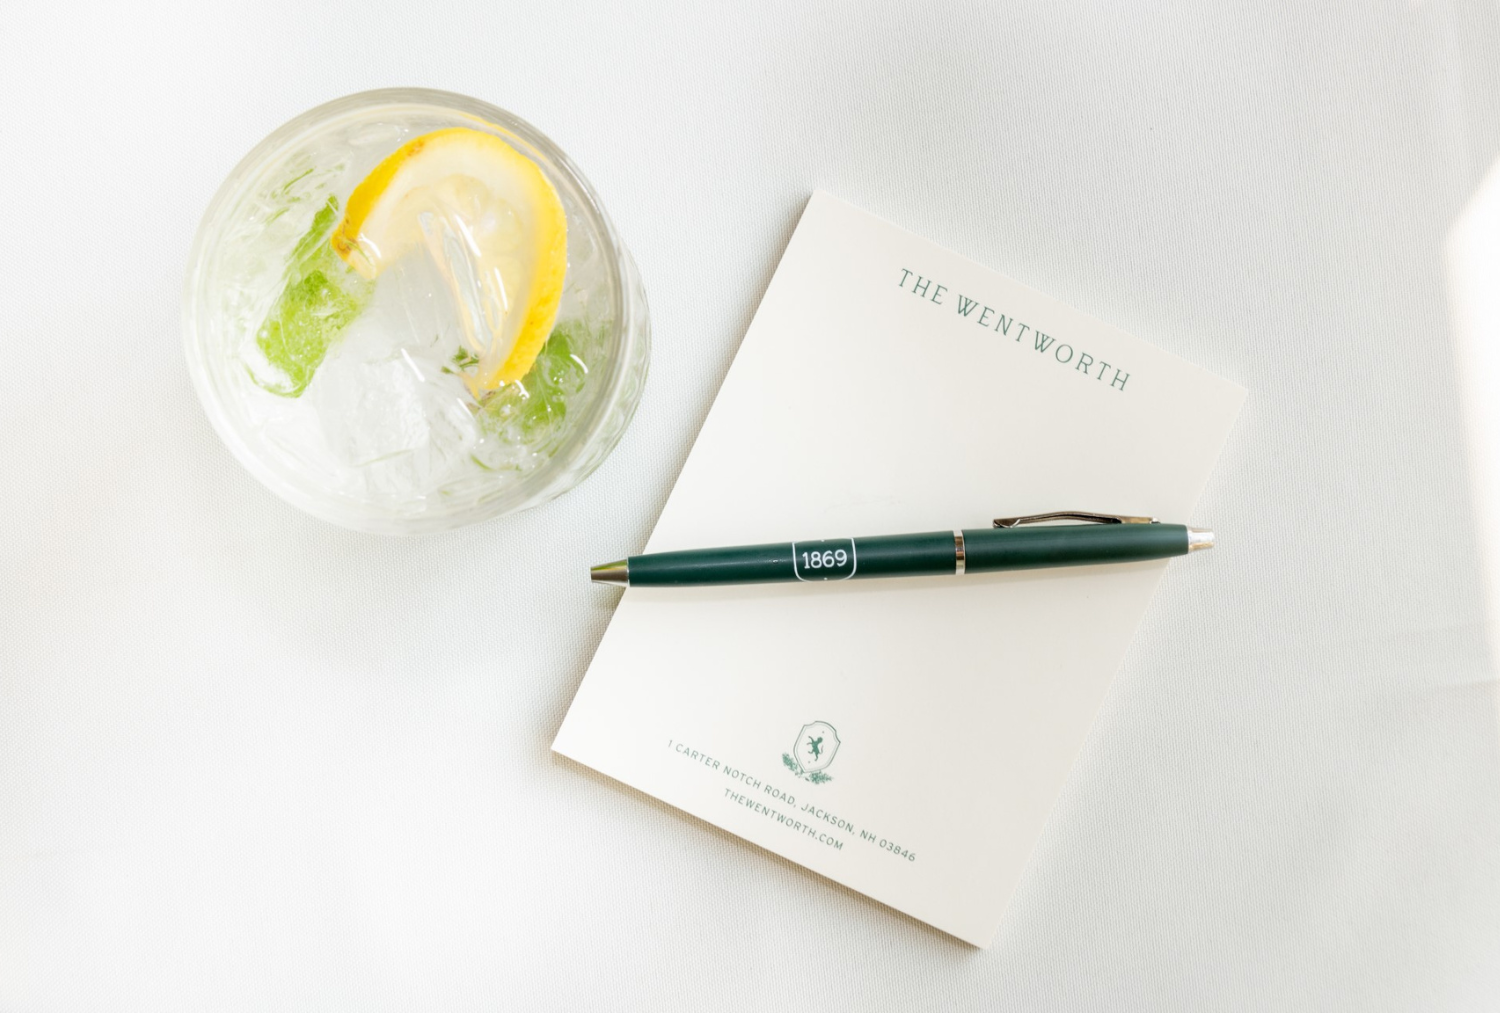 The Wentworth notepad with pen and drink